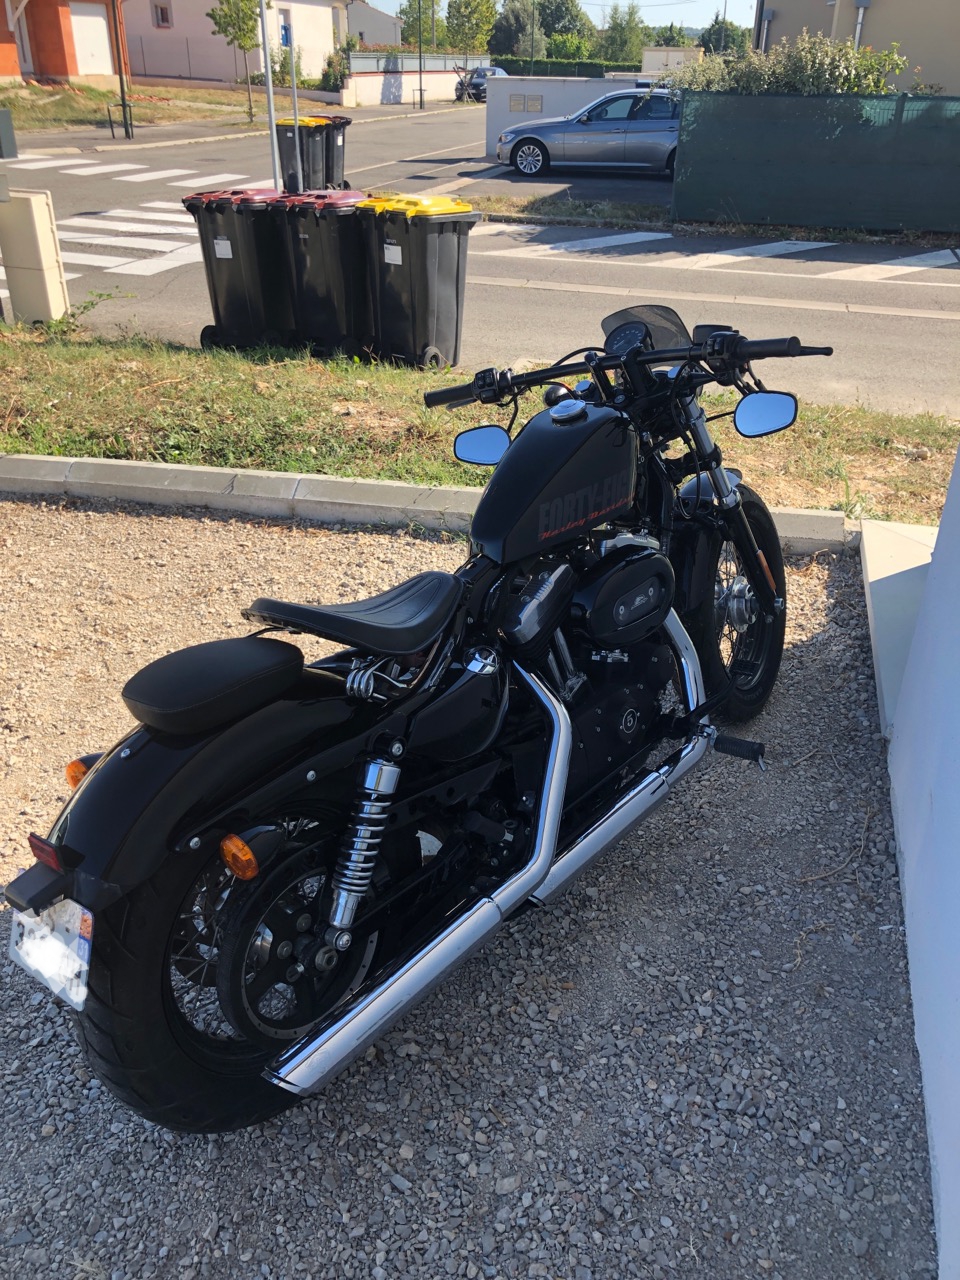 forty-eight à vendre 20191010